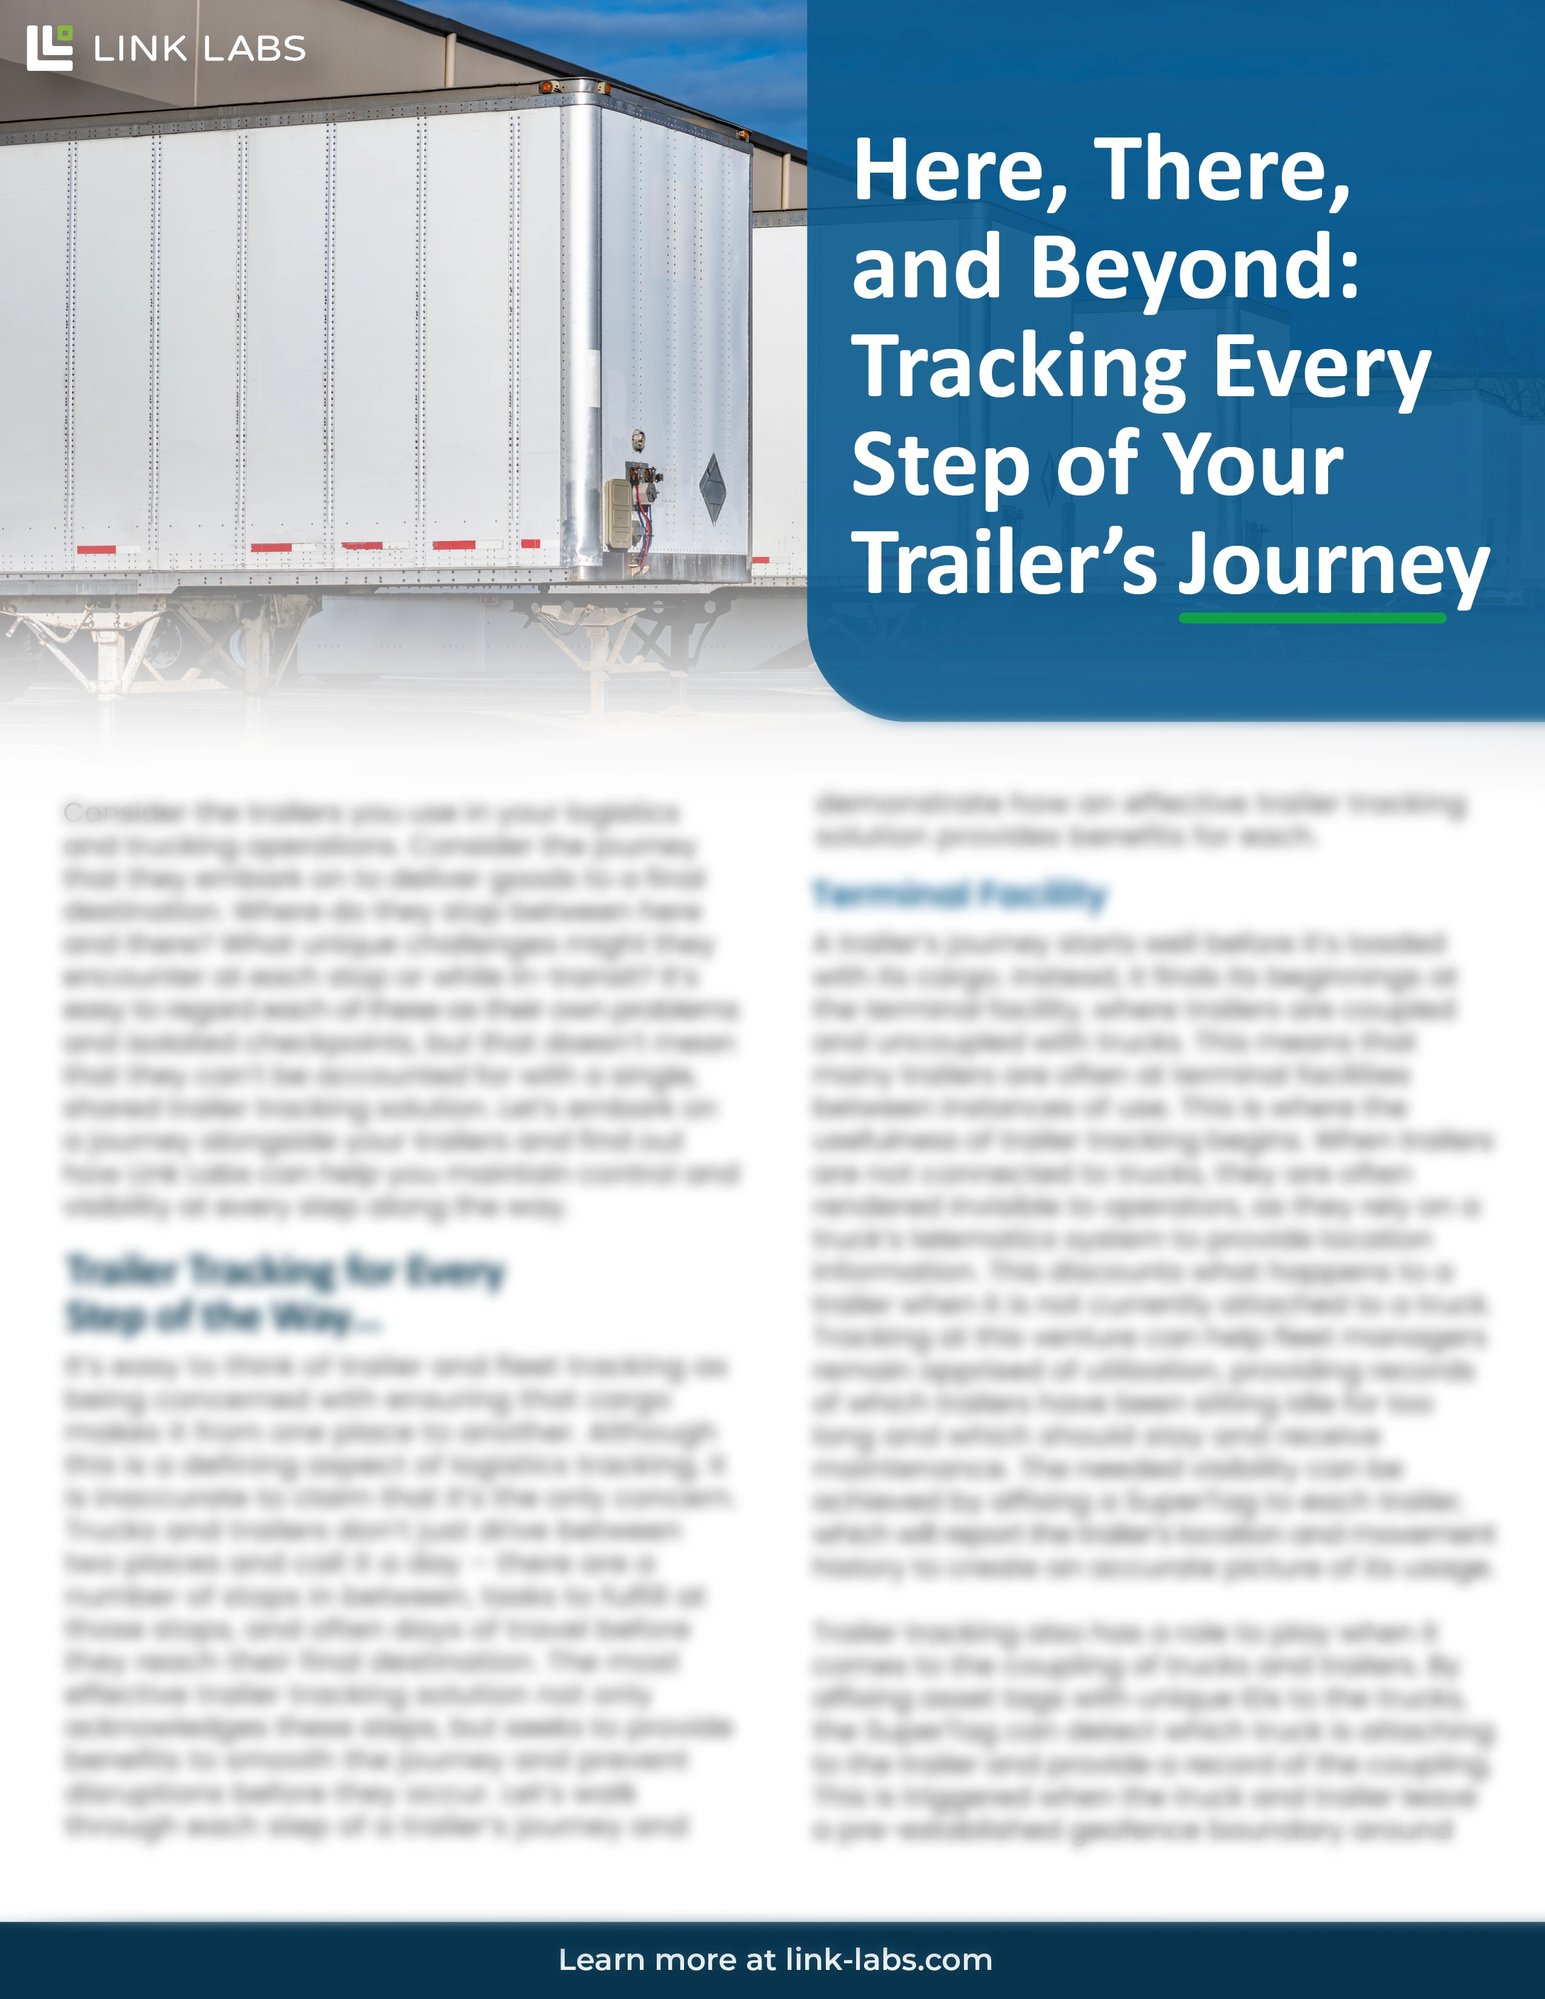 Here, There, and Beyond: Tracking Every Step of Your Trailer’s Journey